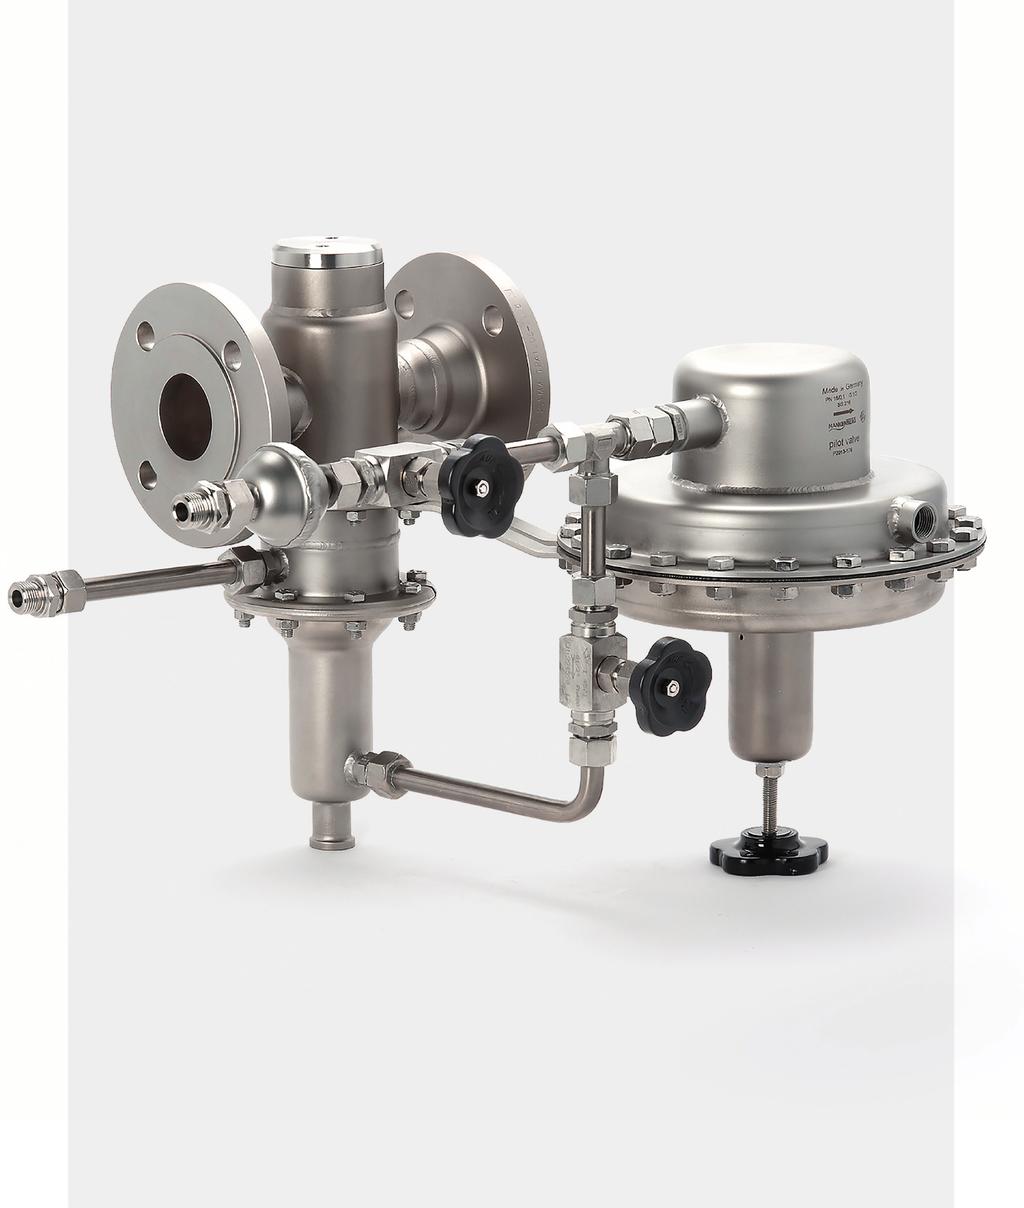 Pilot-operated Control Valve CrNiMo stainless steel (316) deep drawn, corrosion-resistant, lightweight and compact long operational lifespan, easy installation 1 Special Feature large control surface